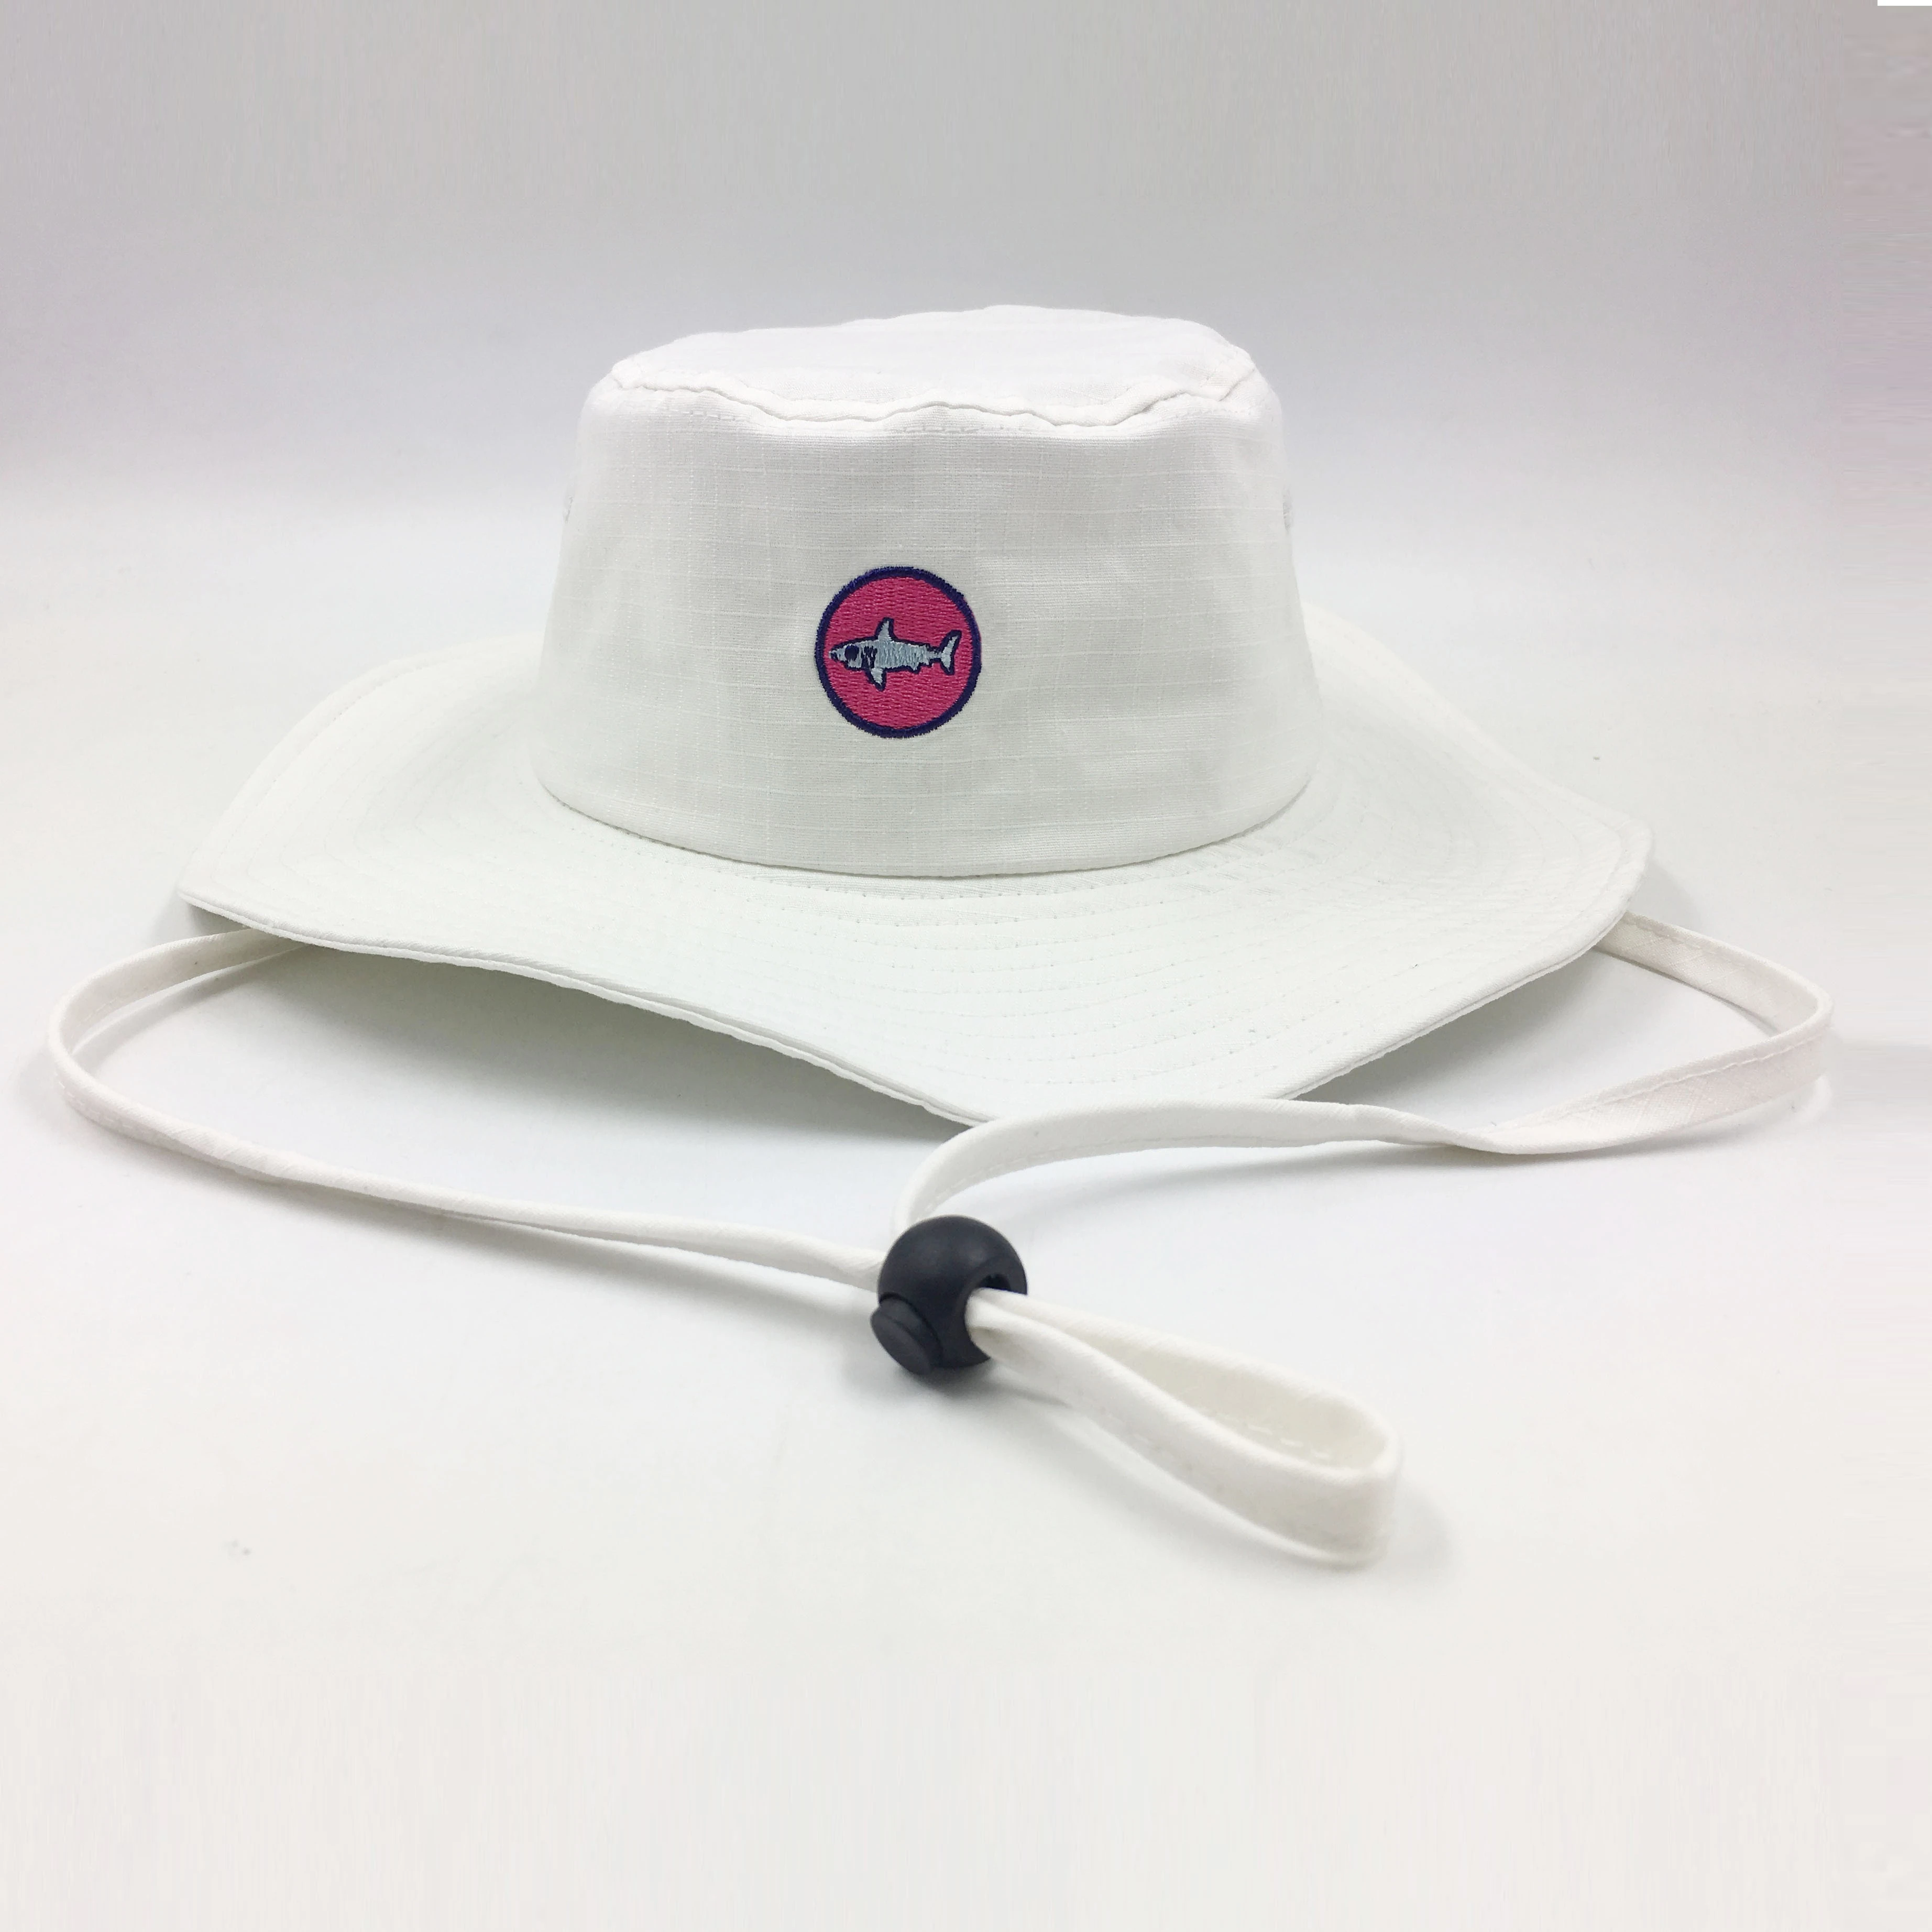 OEM wide brim white bucket hat UPF40+ sun protect fishing cap with shark brand embroidery